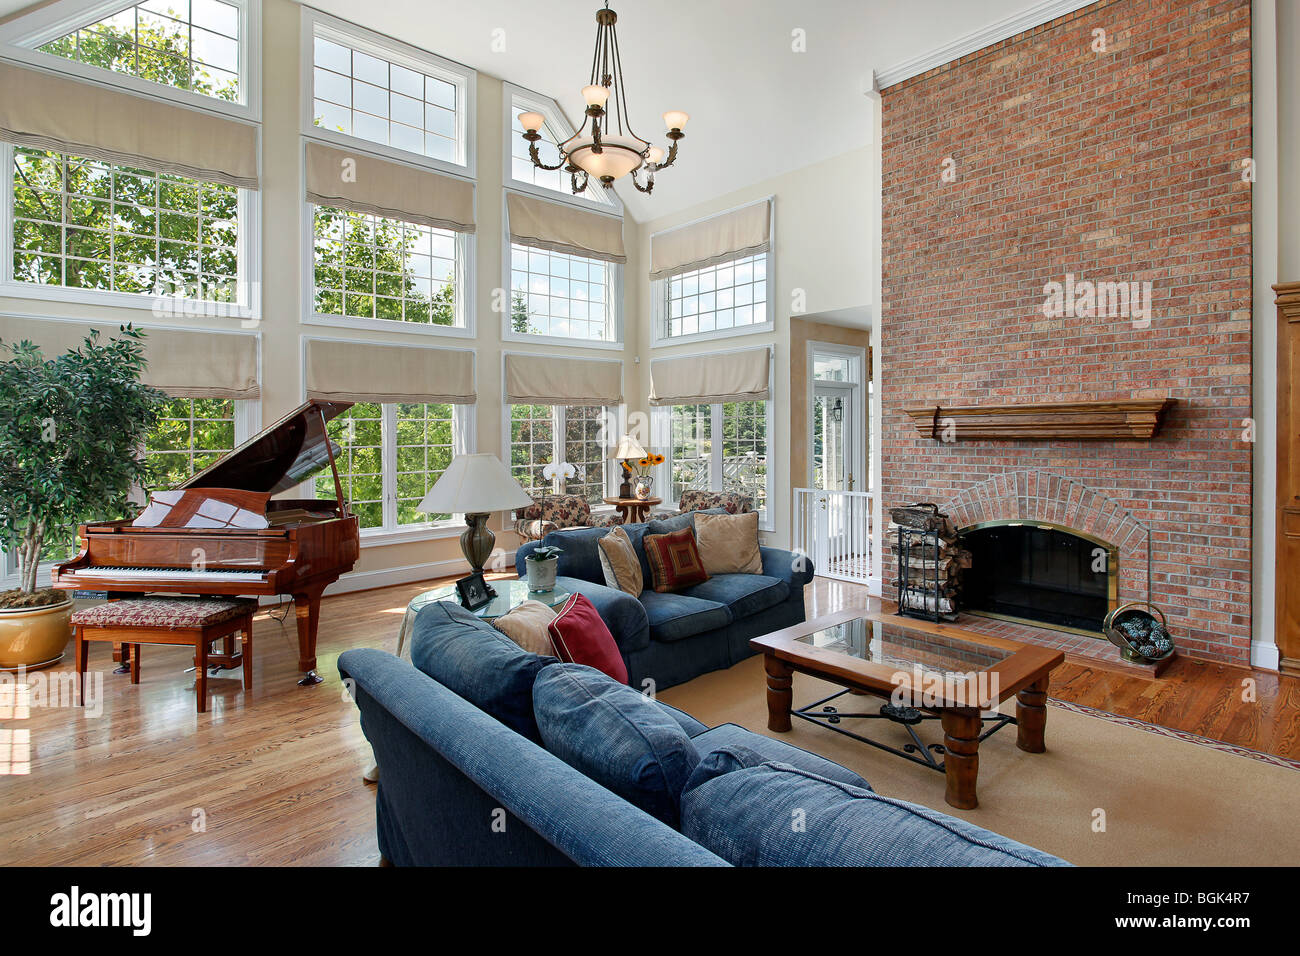 Family room with two story brick fireplace Stock Photo